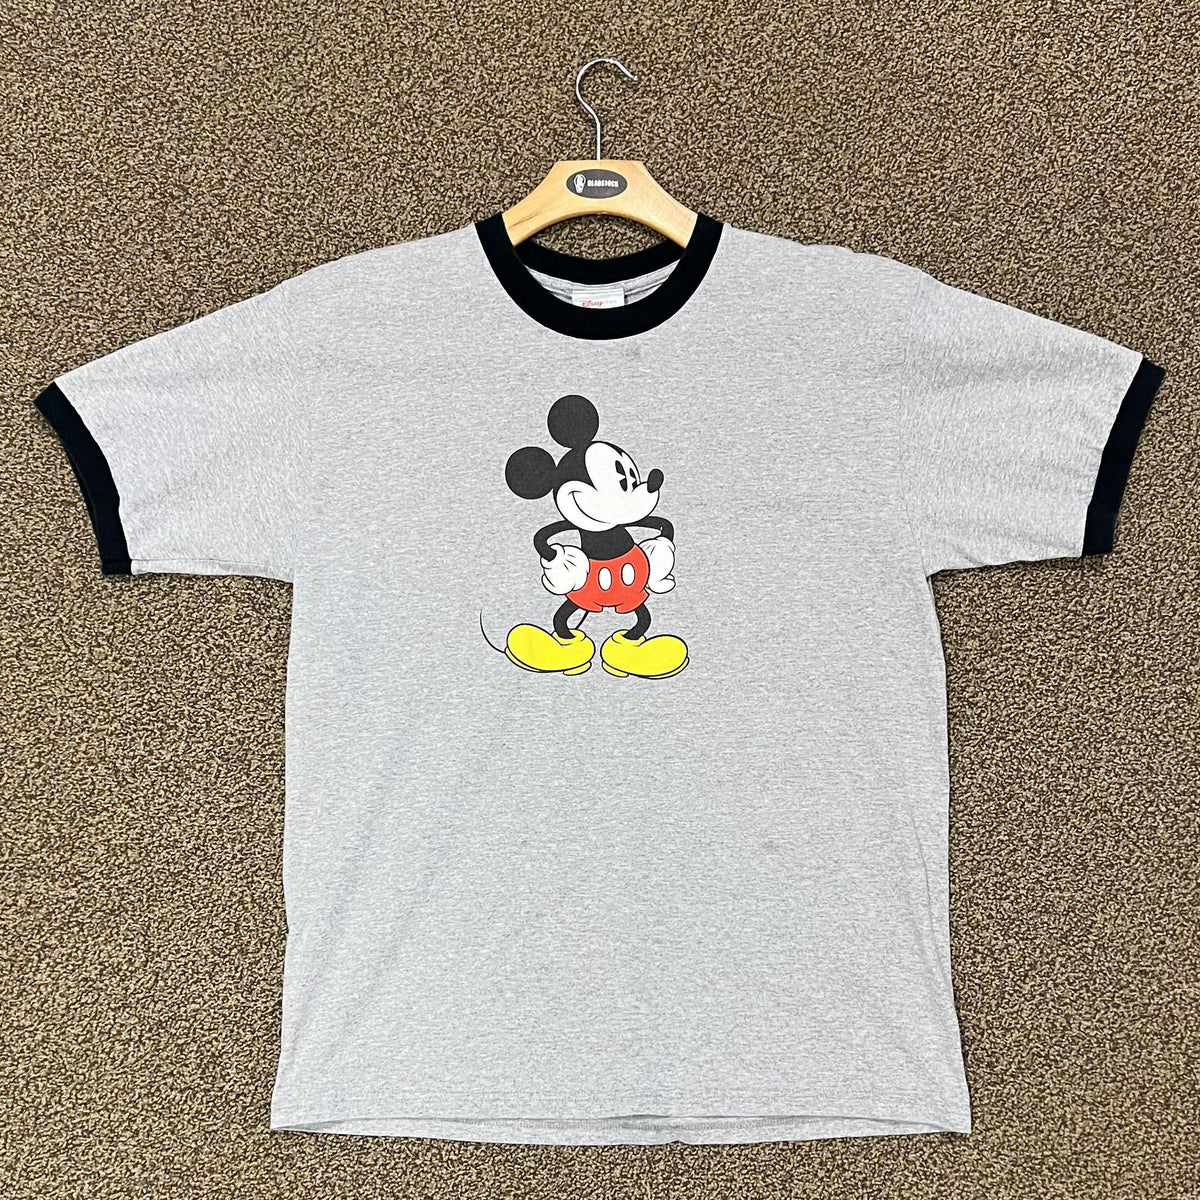 Vintage Disney Store Mickey Mouse Grey Ringer Tee – Deadstock